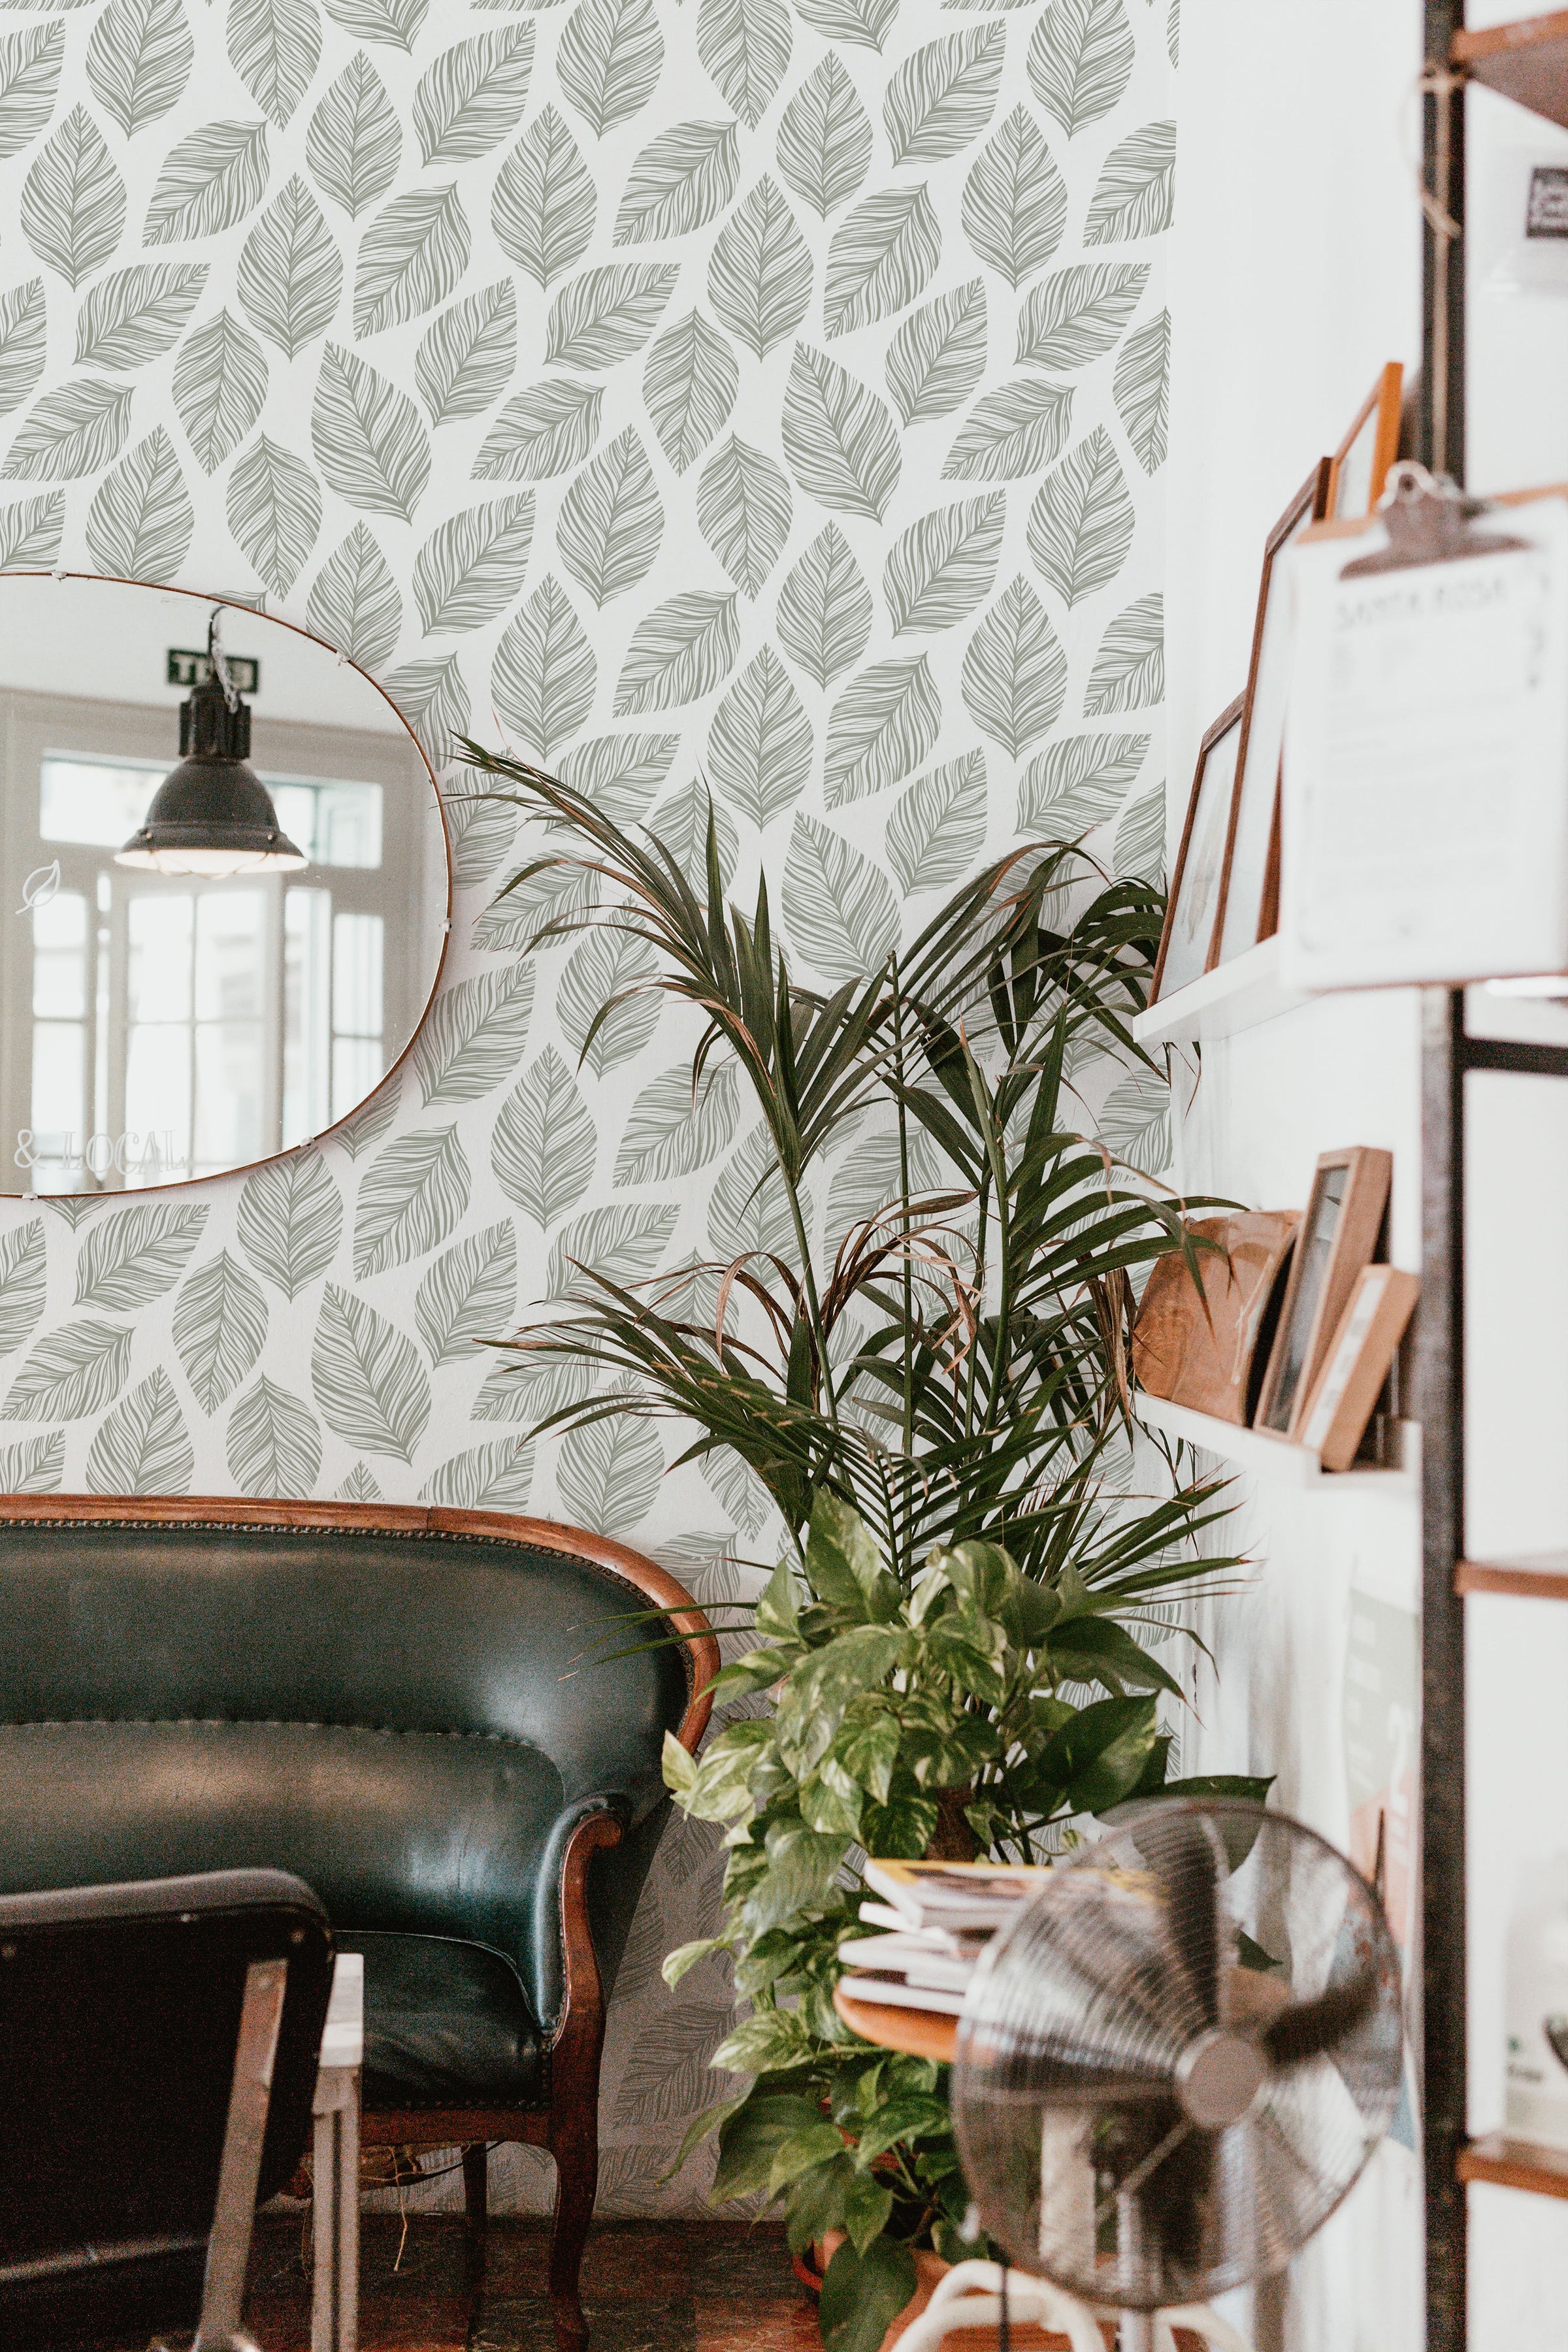 cozy corner of a cafe decorated with Leafy Wallpaper that showcases a clean and serene arrangement of leaf designs in grey on white. The natural theme is complemented by a vintage leather sofa and a vibrant potted plant, creating a welcoming atmosphere.